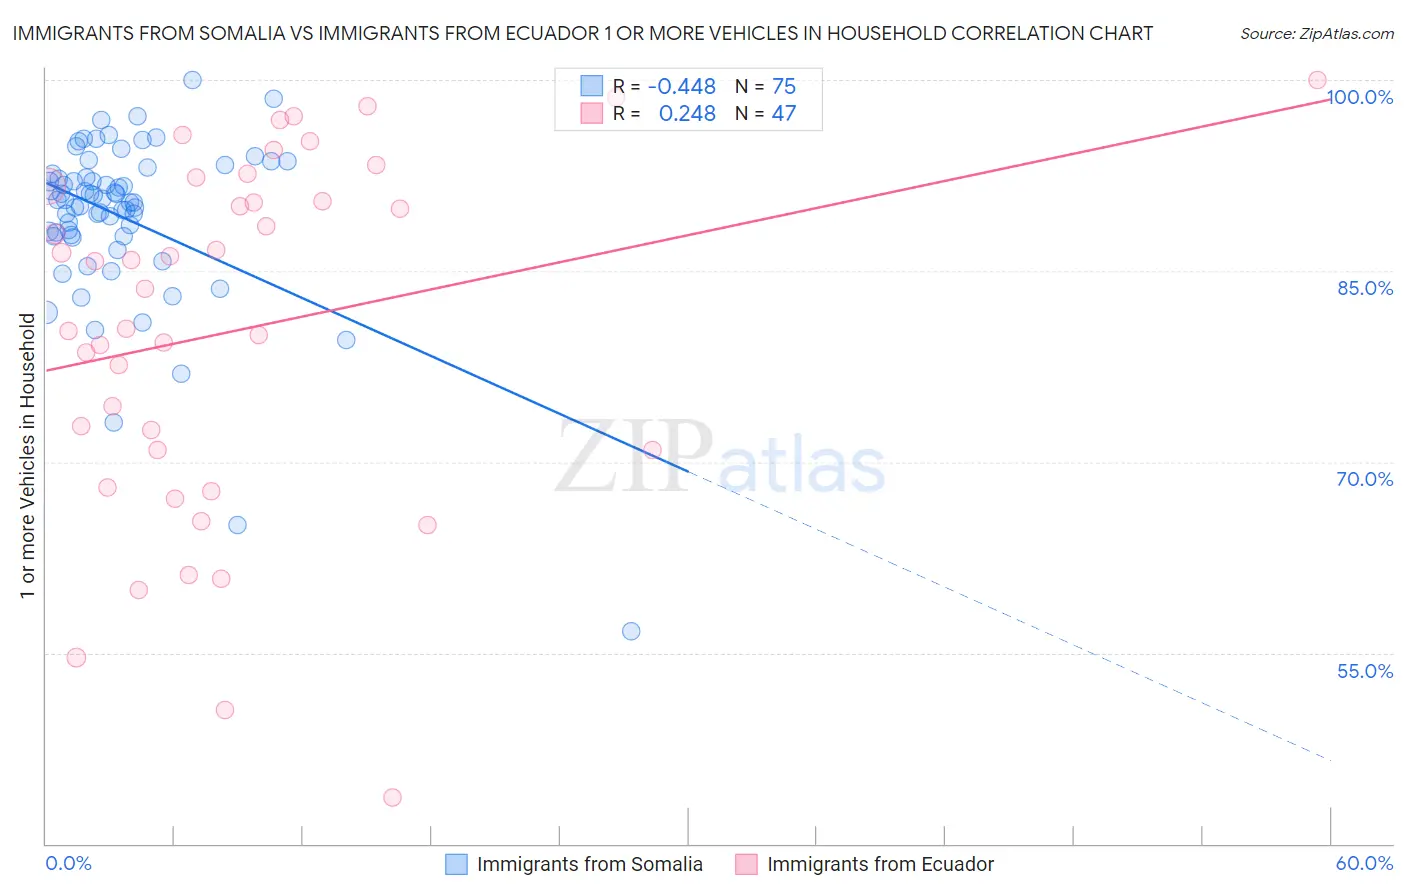 Immigrants from Somalia vs Immigrants from Ecuador 1 or more Vehicles in Household